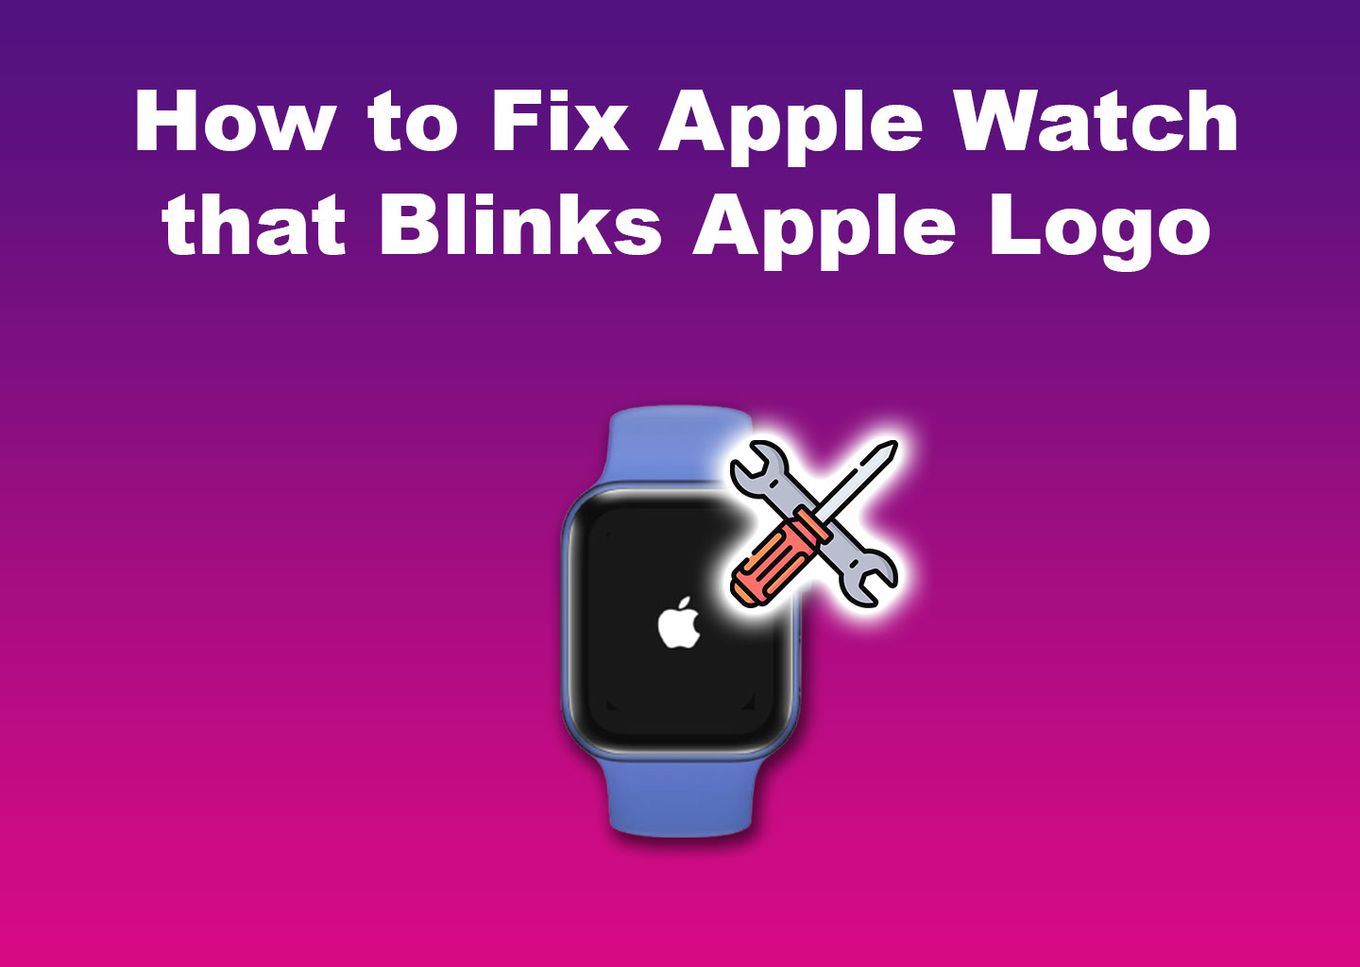 How to Fix Apple Watch that Blinks Apple Logo